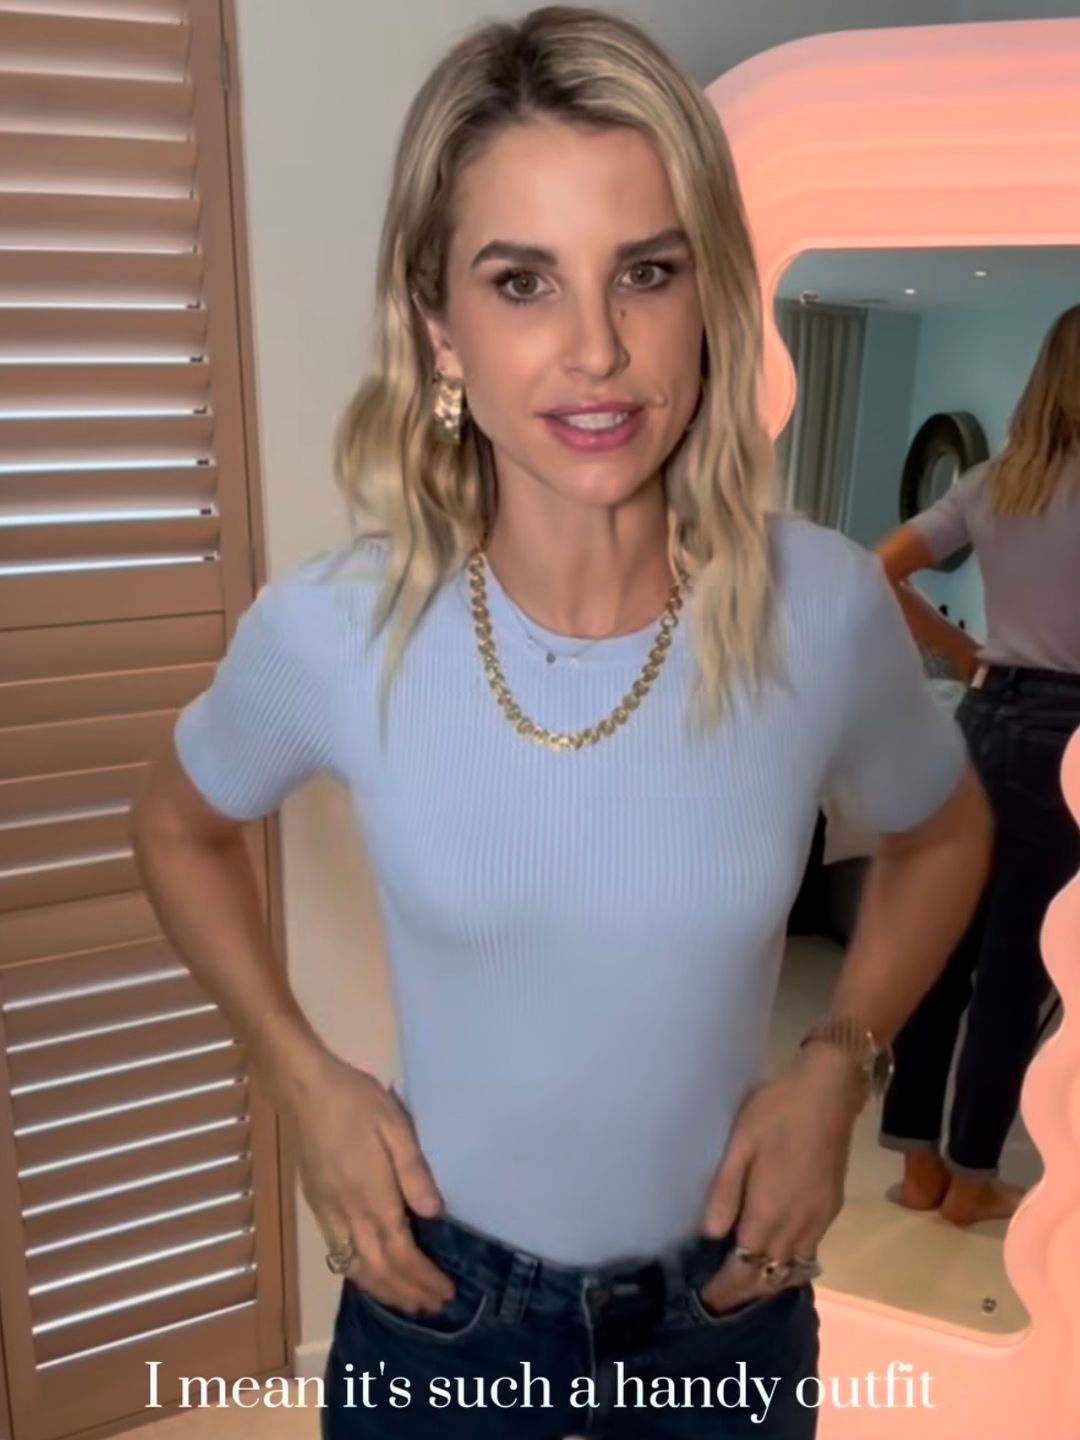 vogue williams in jeans and blue top